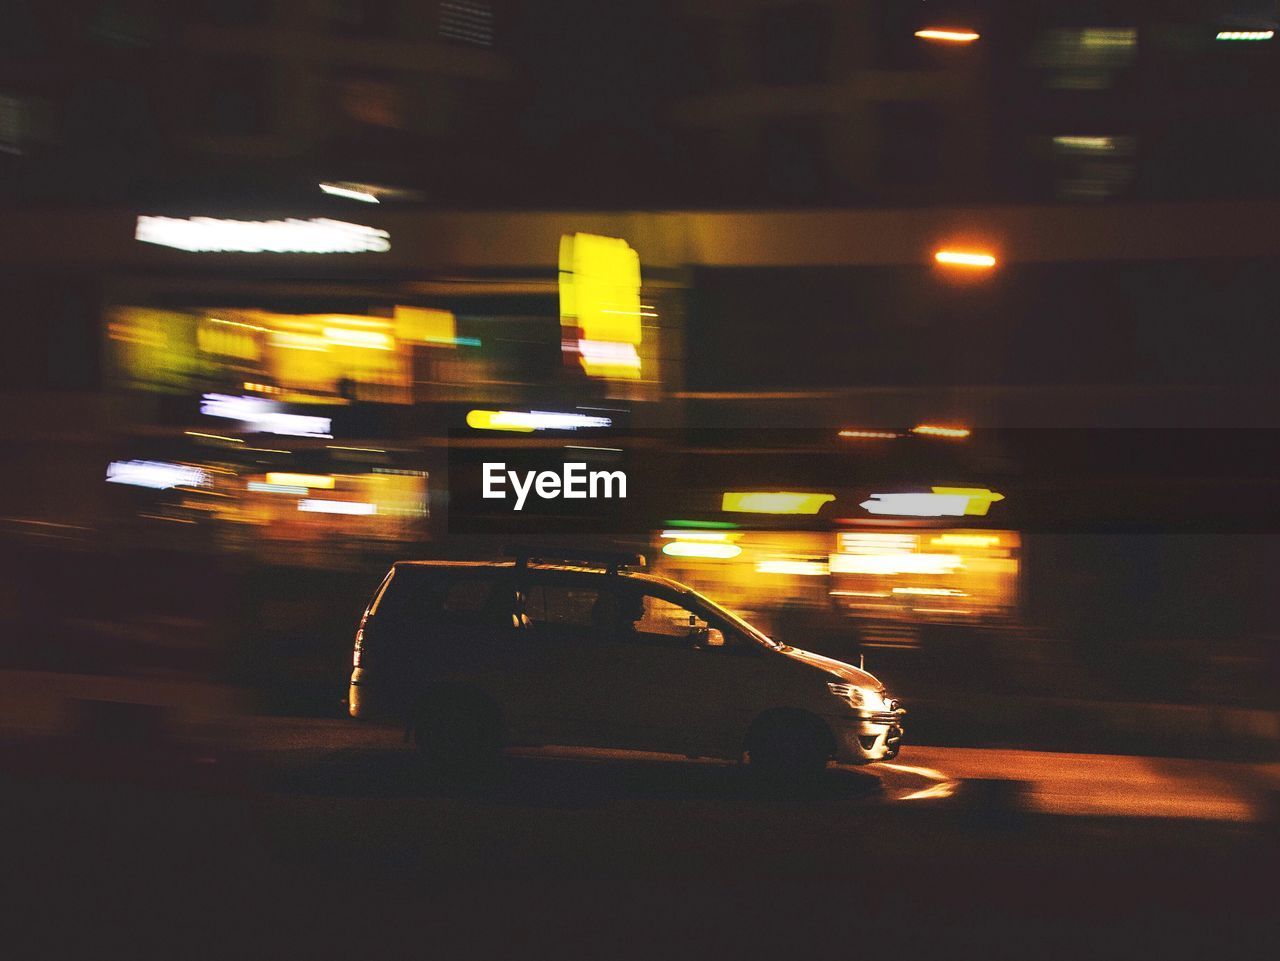 View of car in motion at night